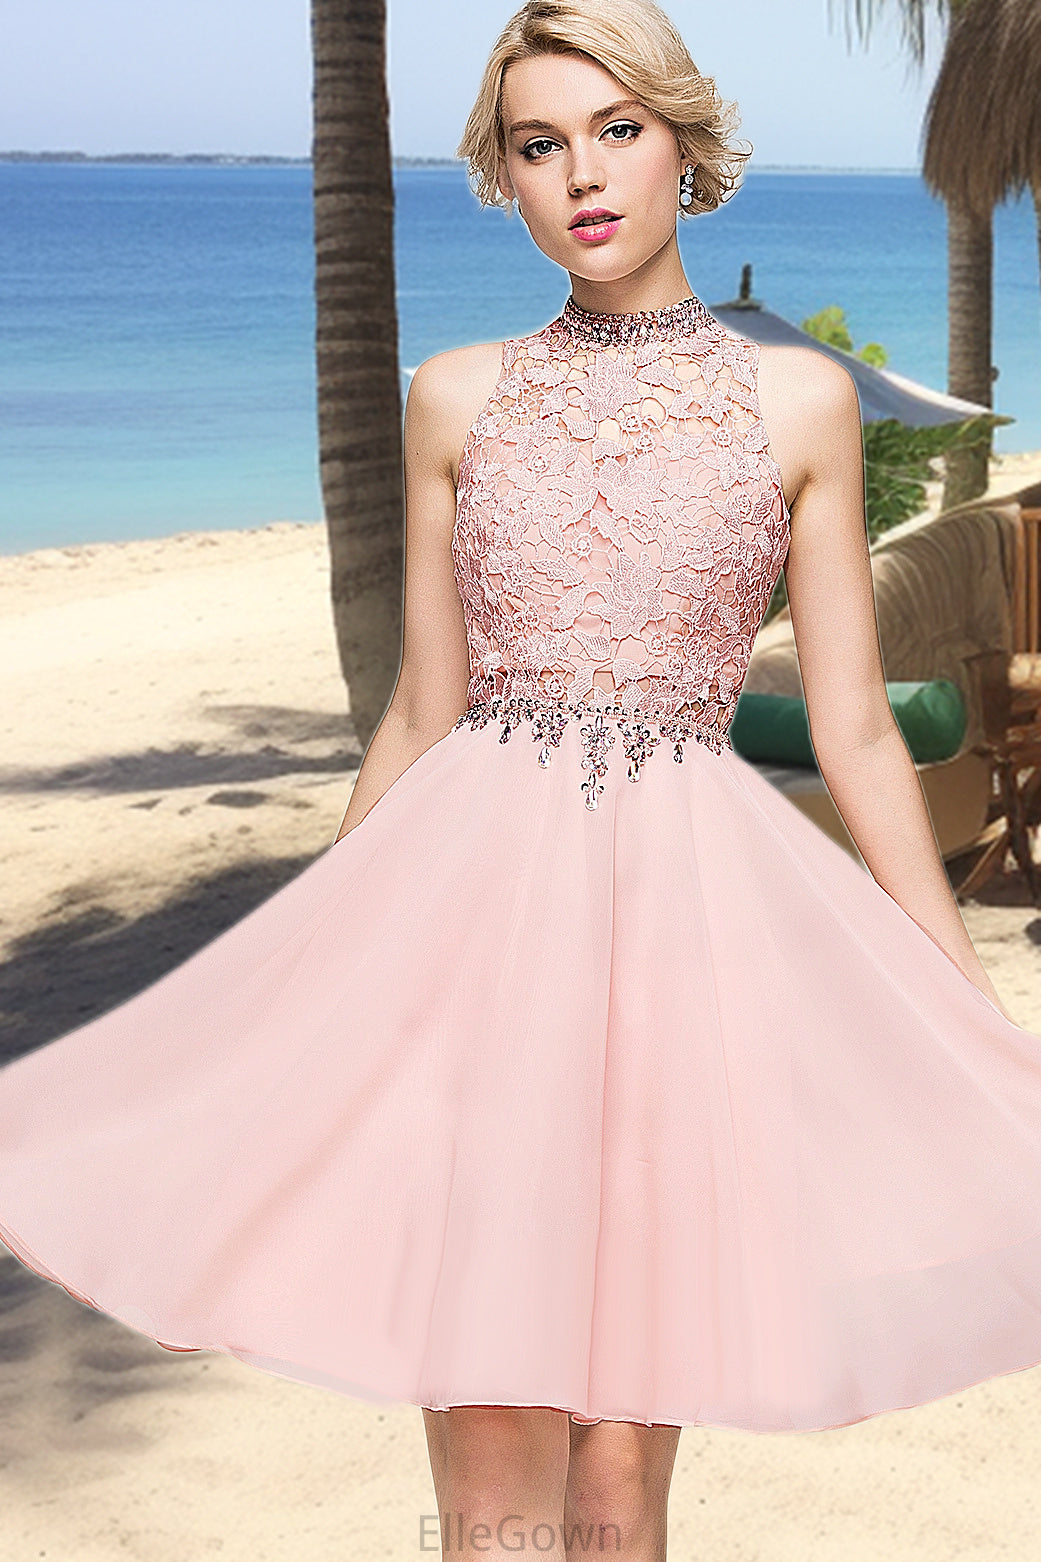 Paisley A-line High Neck Knee-Length Chiffon Lace Homecoming Dress With Beading Sequins DEP0020596